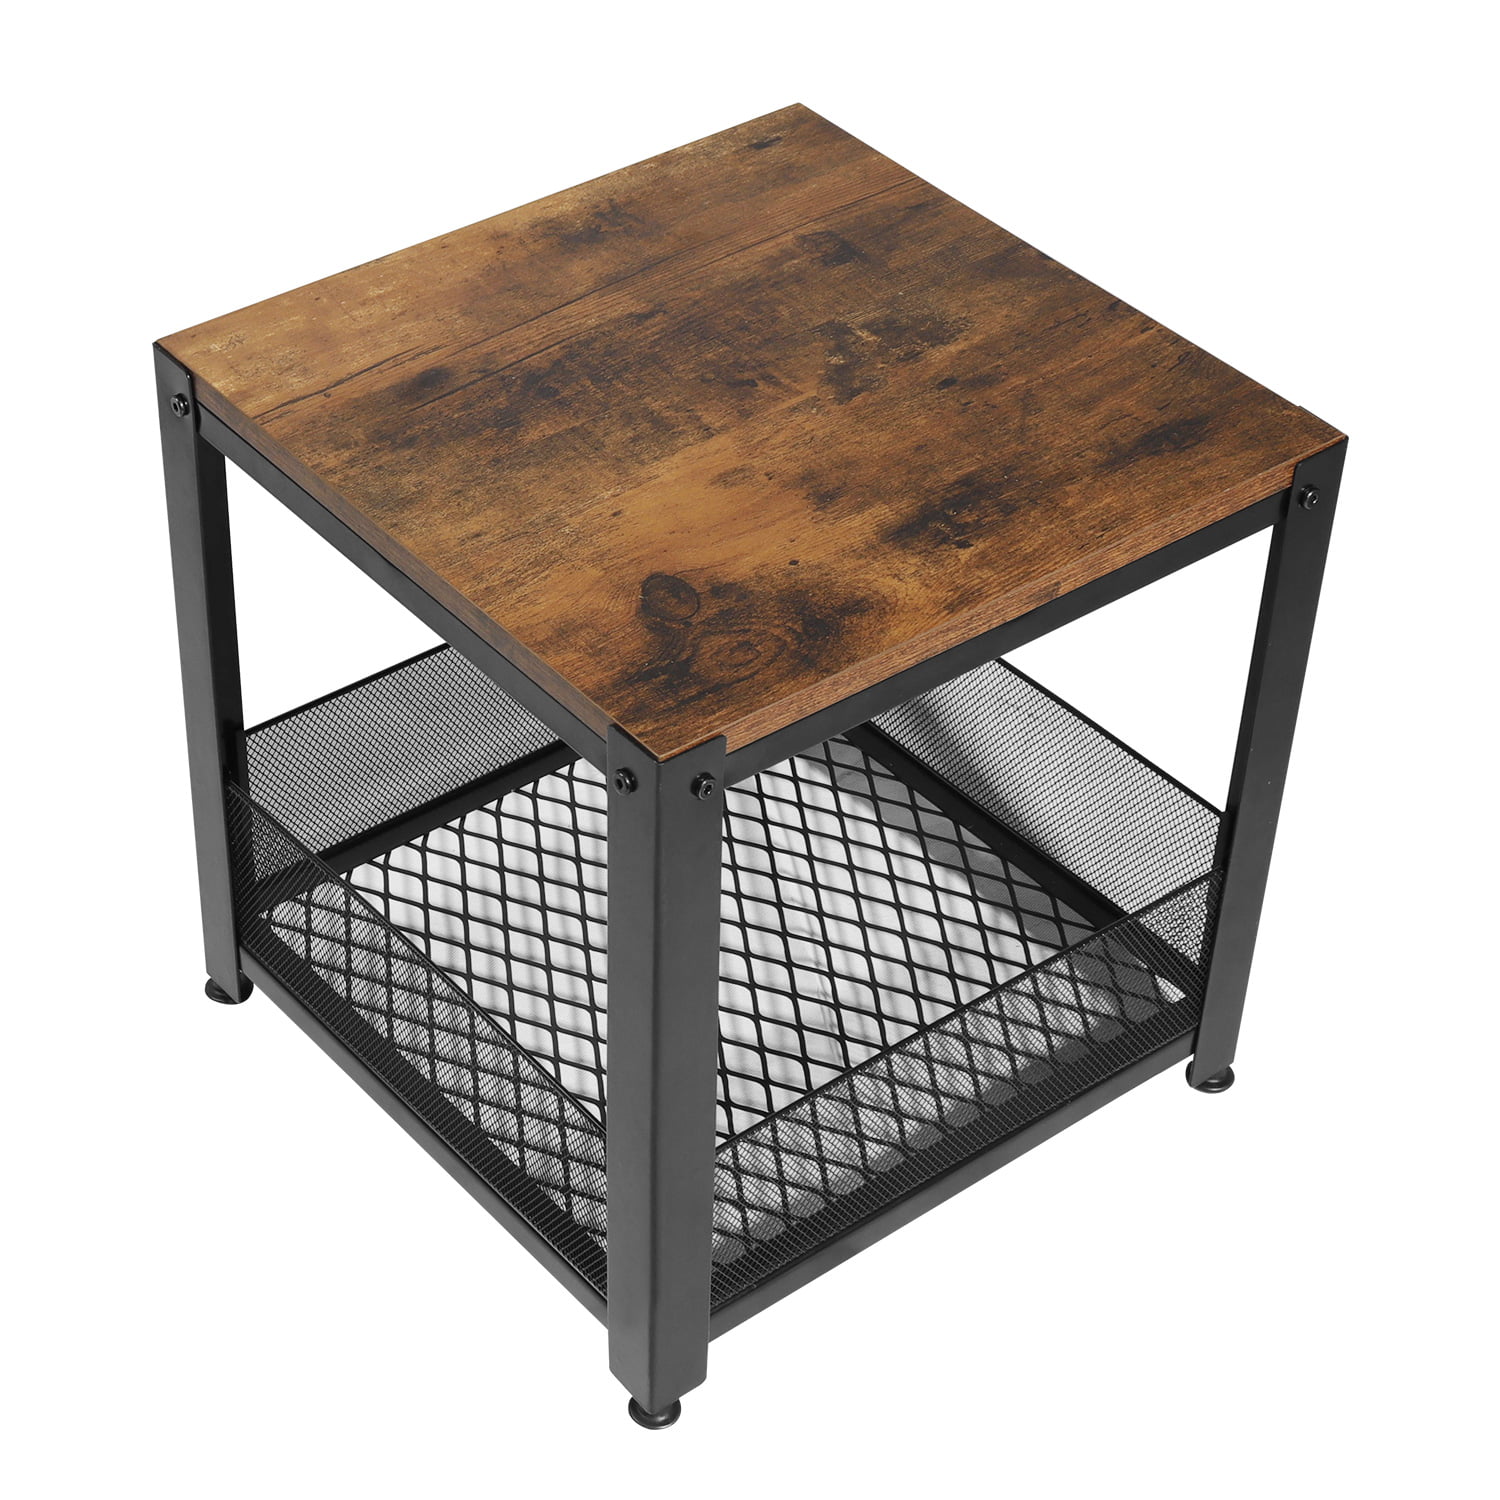 Coffee Table End Table Rustic Industrial Cocktail Wood With Metal Mesh Shelf 